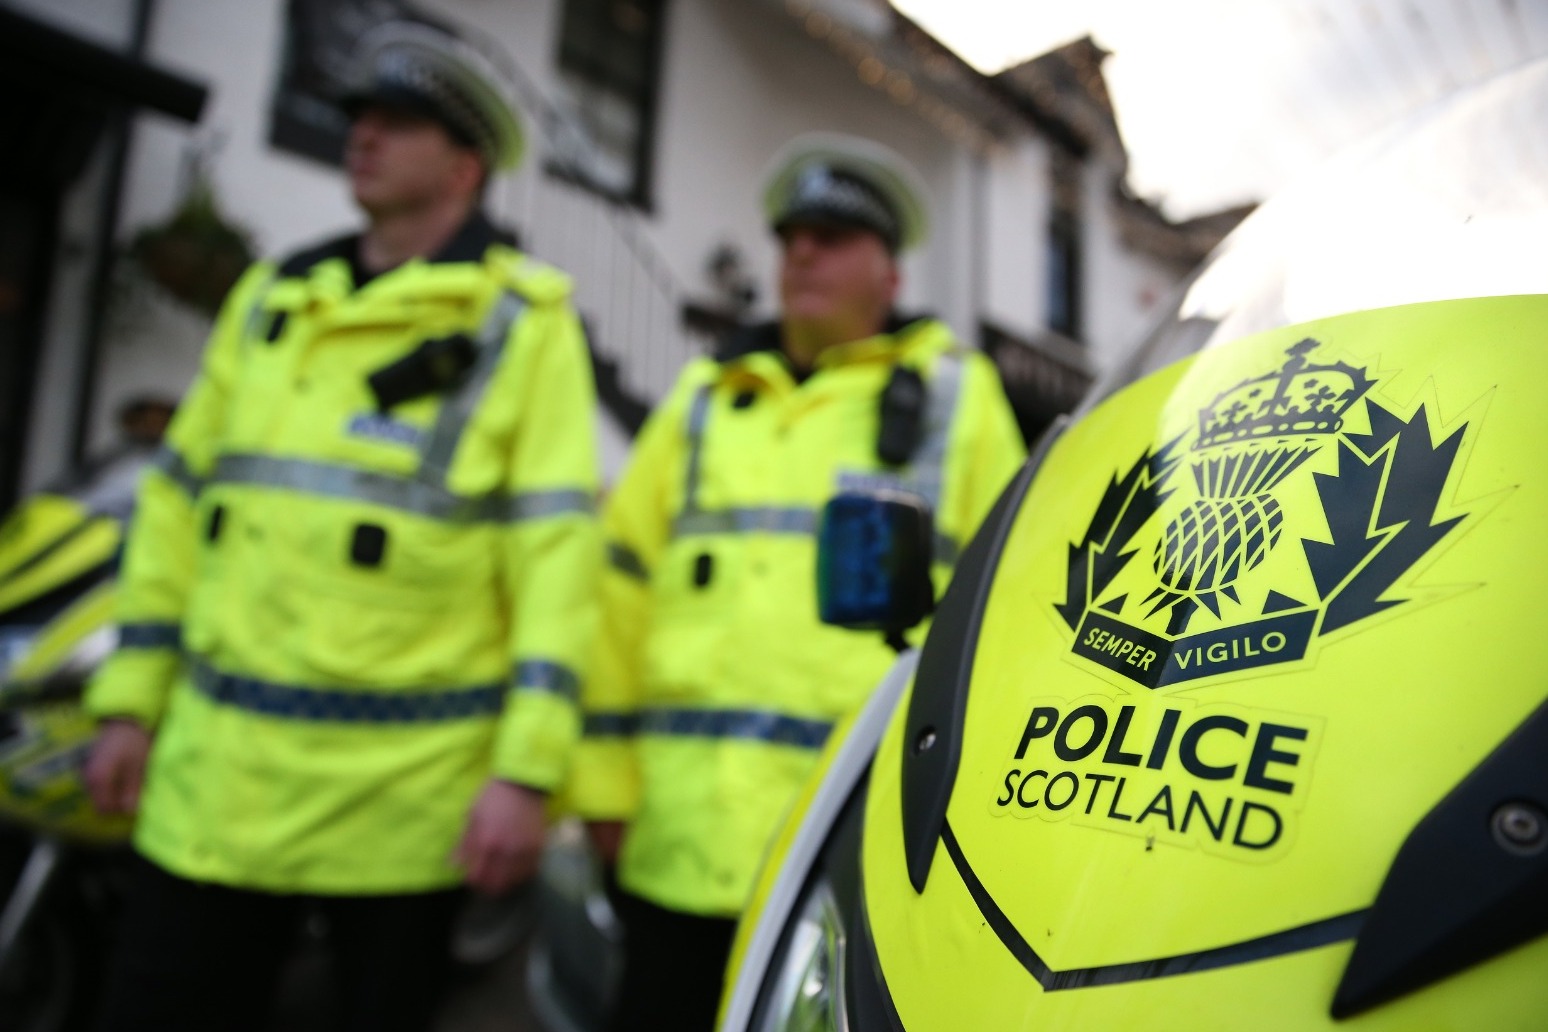 More than 45m worth of drugs seized in Scotland over three months